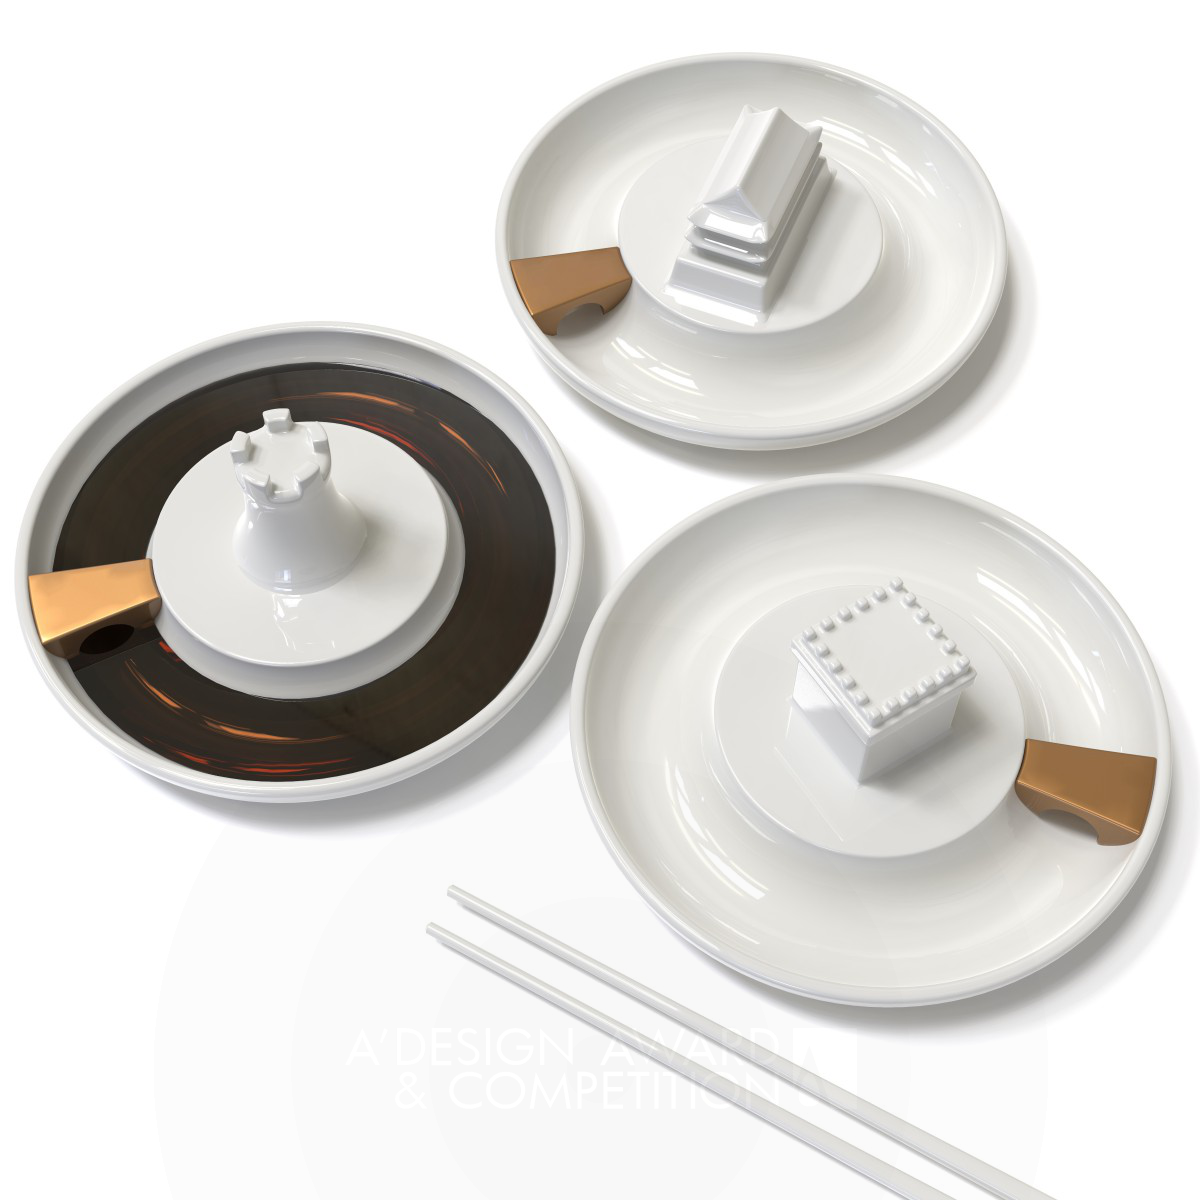 Castels: A Unique Sauce Dish Inspired by Architectural Works